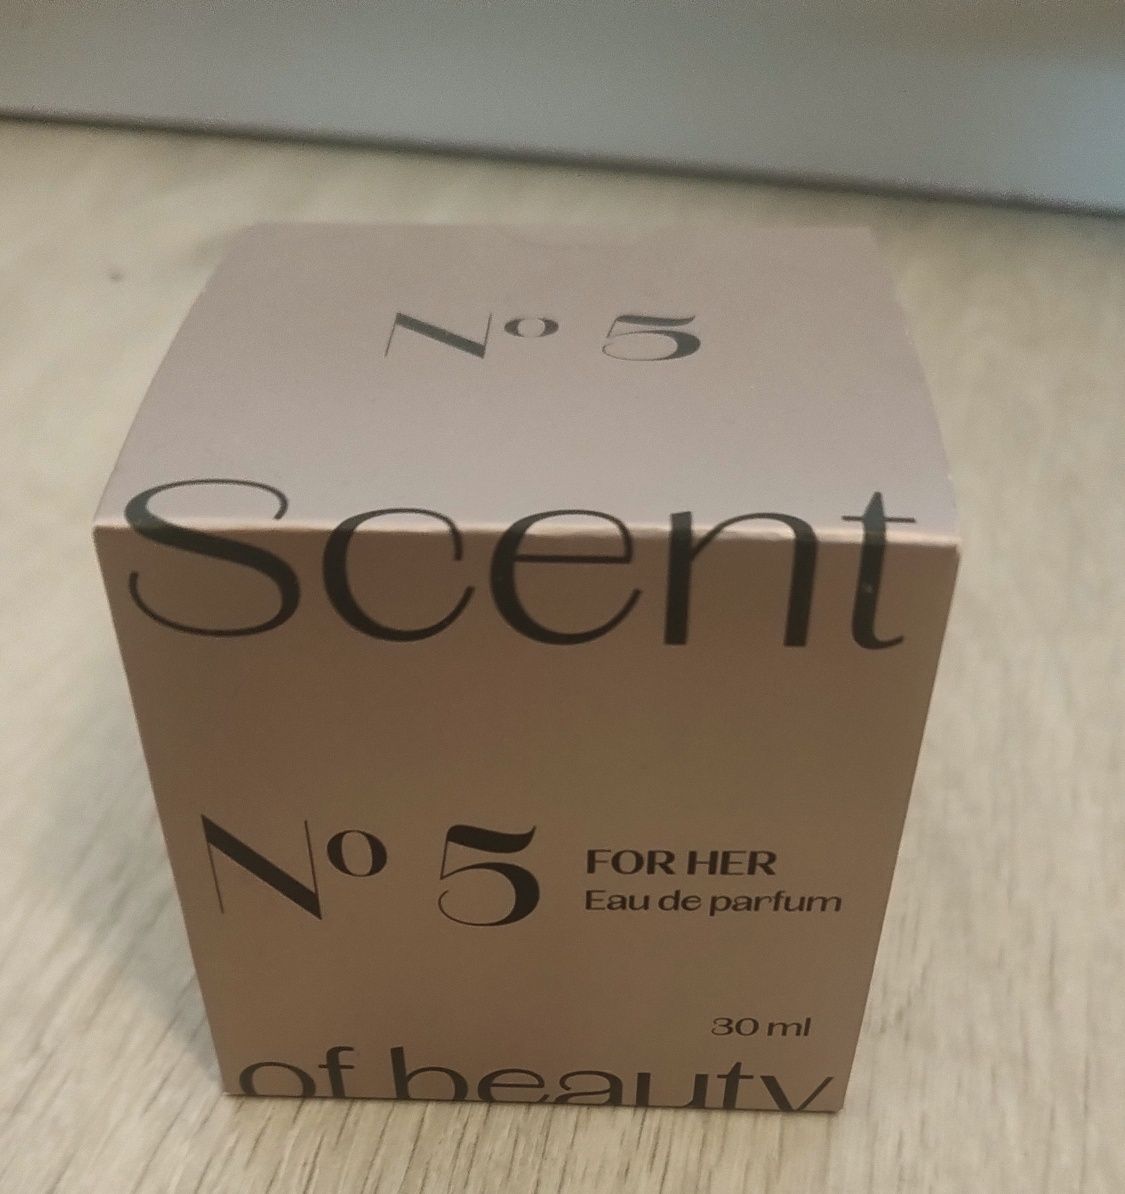 Scent No 5 for her perfum 30 ml Nowy plomba